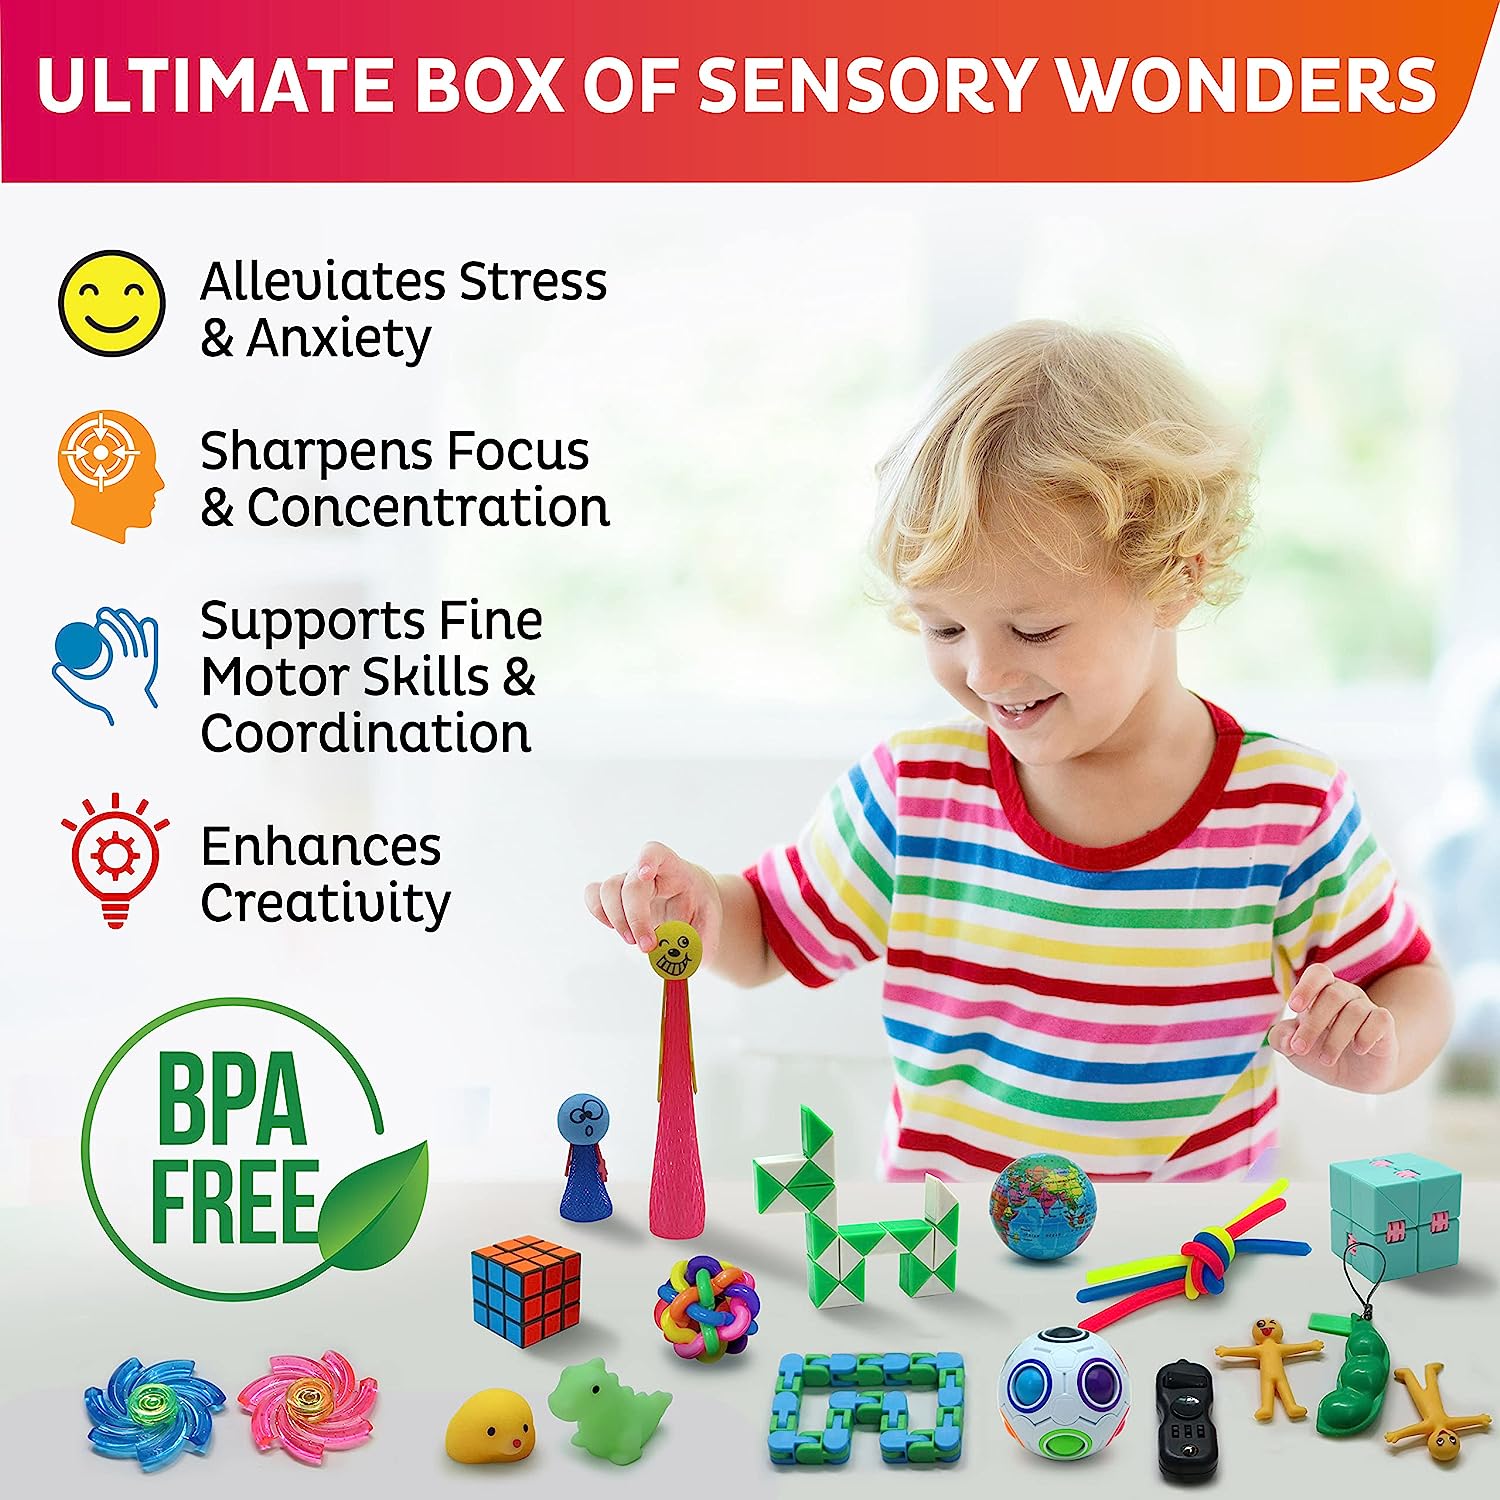 30 Pack Sensory Fidget Toy Set Stress Relief Kit Anti-Anxiety Tools Sensory Toy ADD OCD Autistic Children & Adults Stress Balls Fidget Spinner Infinity Cube Puzzle Snake Multi (SK-30)